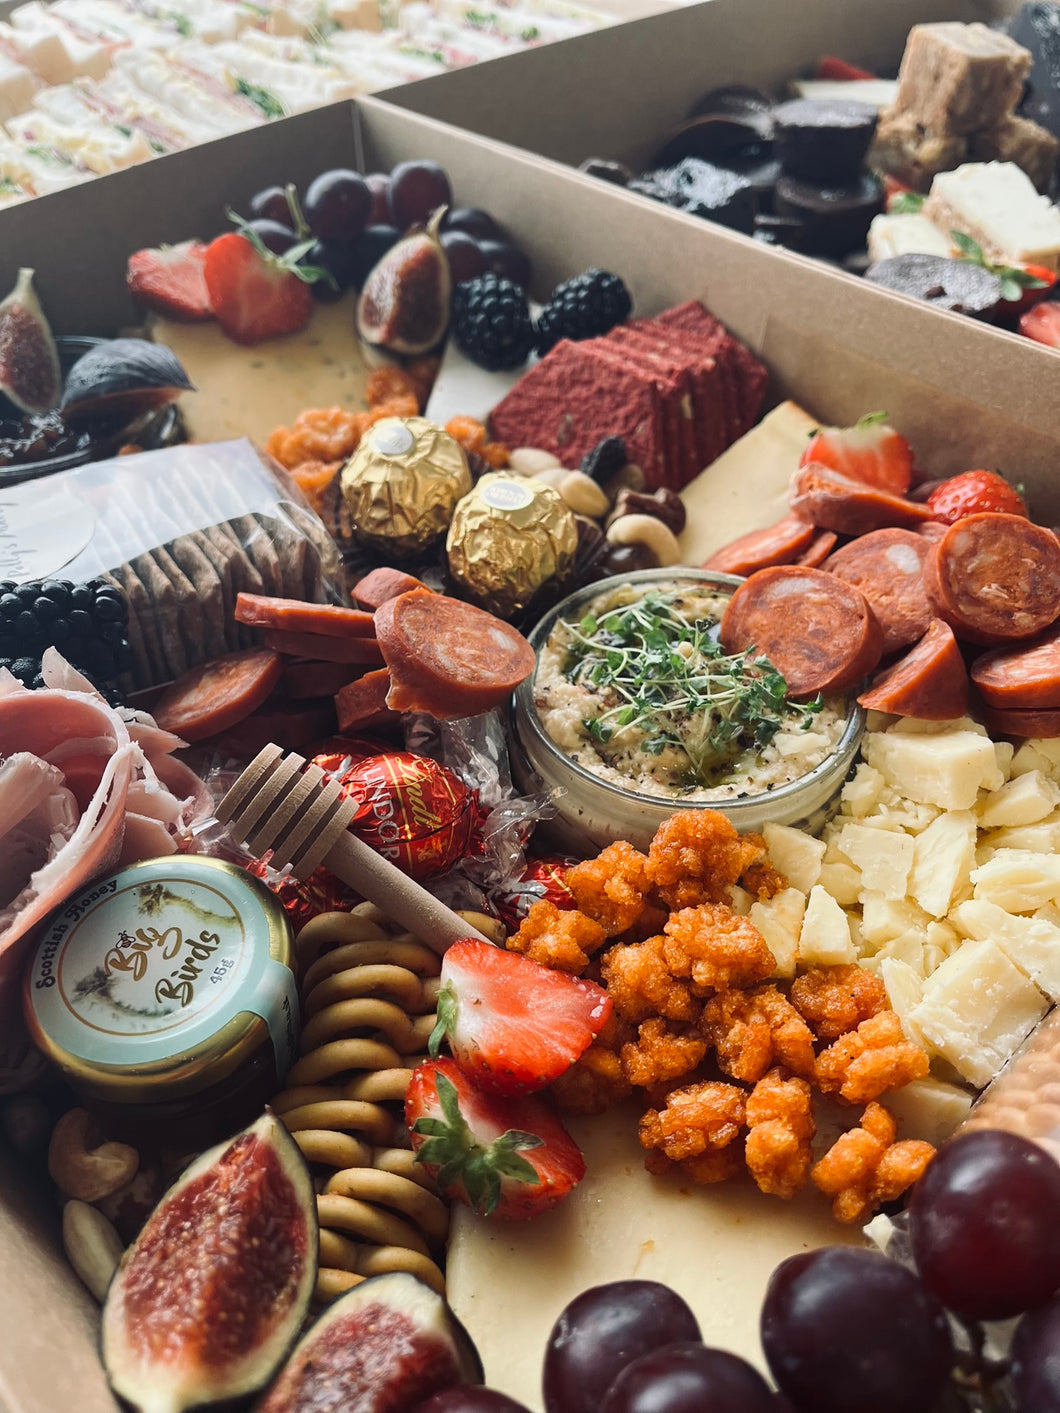 Pollys Favourite Grazing Platter for 6-8 people